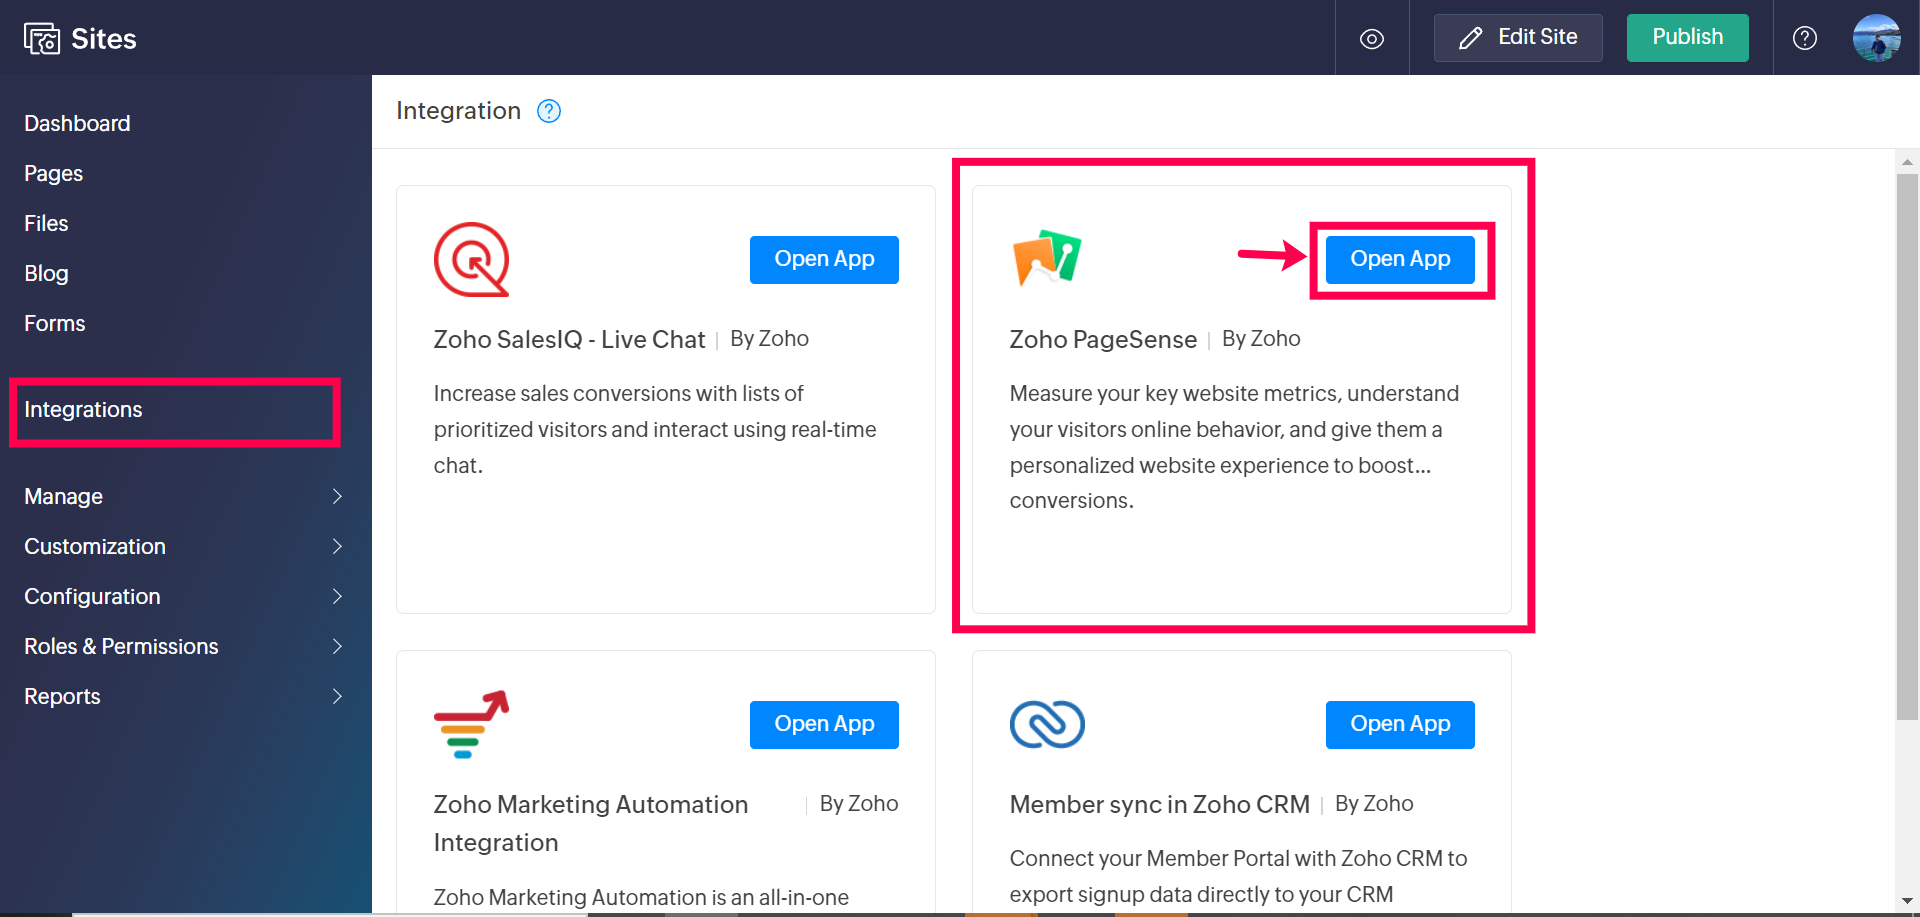 How to install the Zoho PageSense code snippet on Zoho Sites